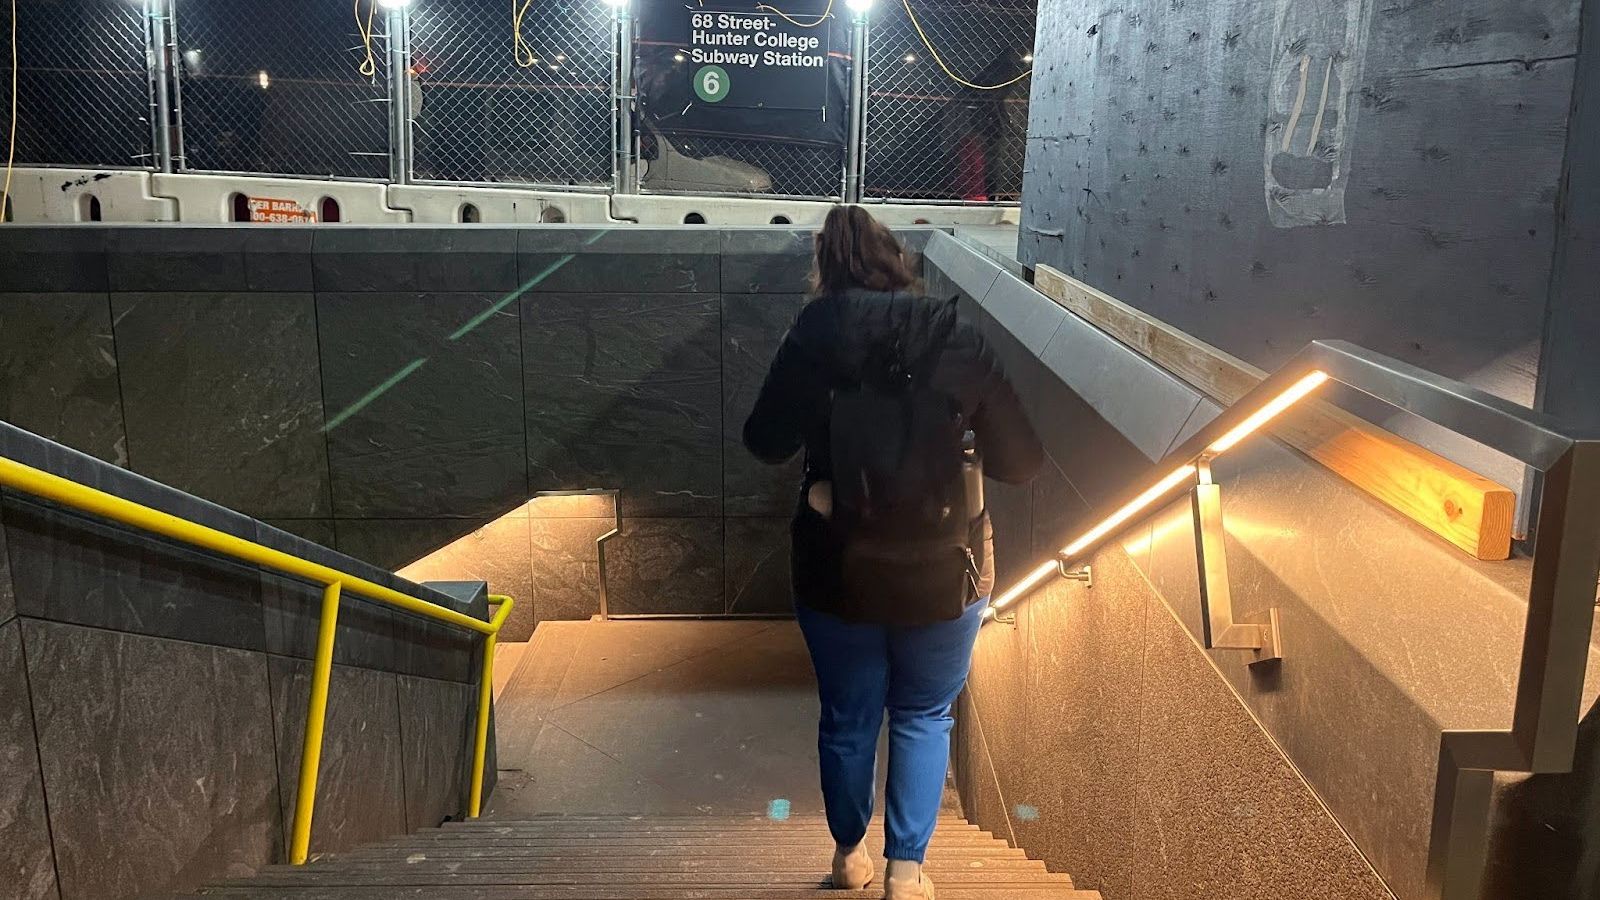 A person walking down the 68th street Hunter College subway entrance.